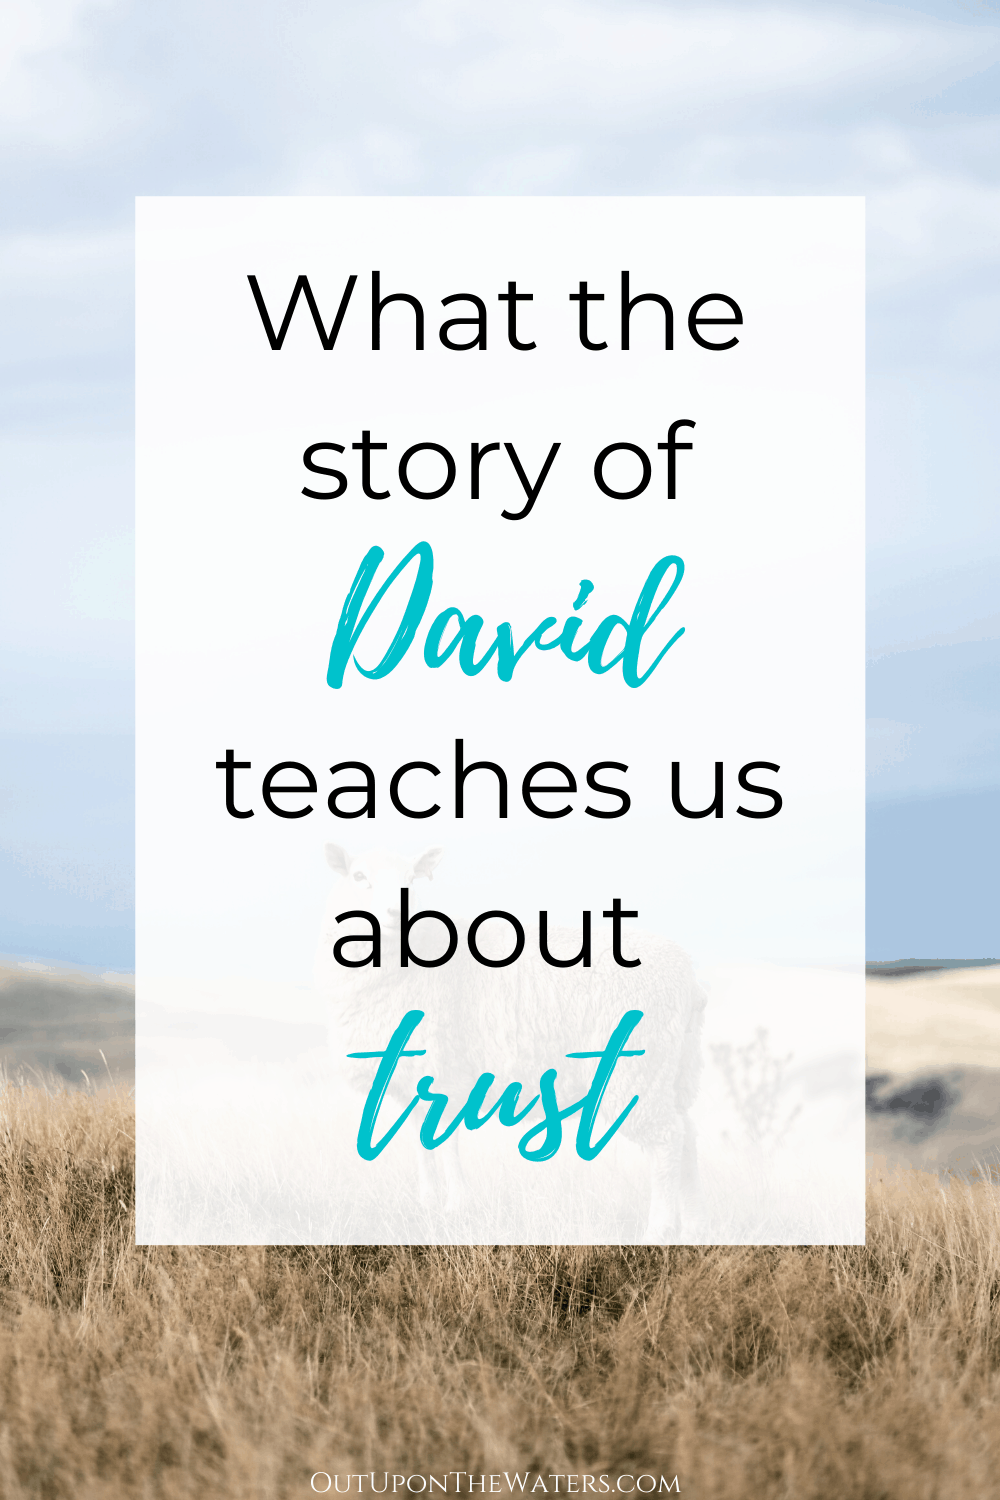 What the story of David teaches us about trust